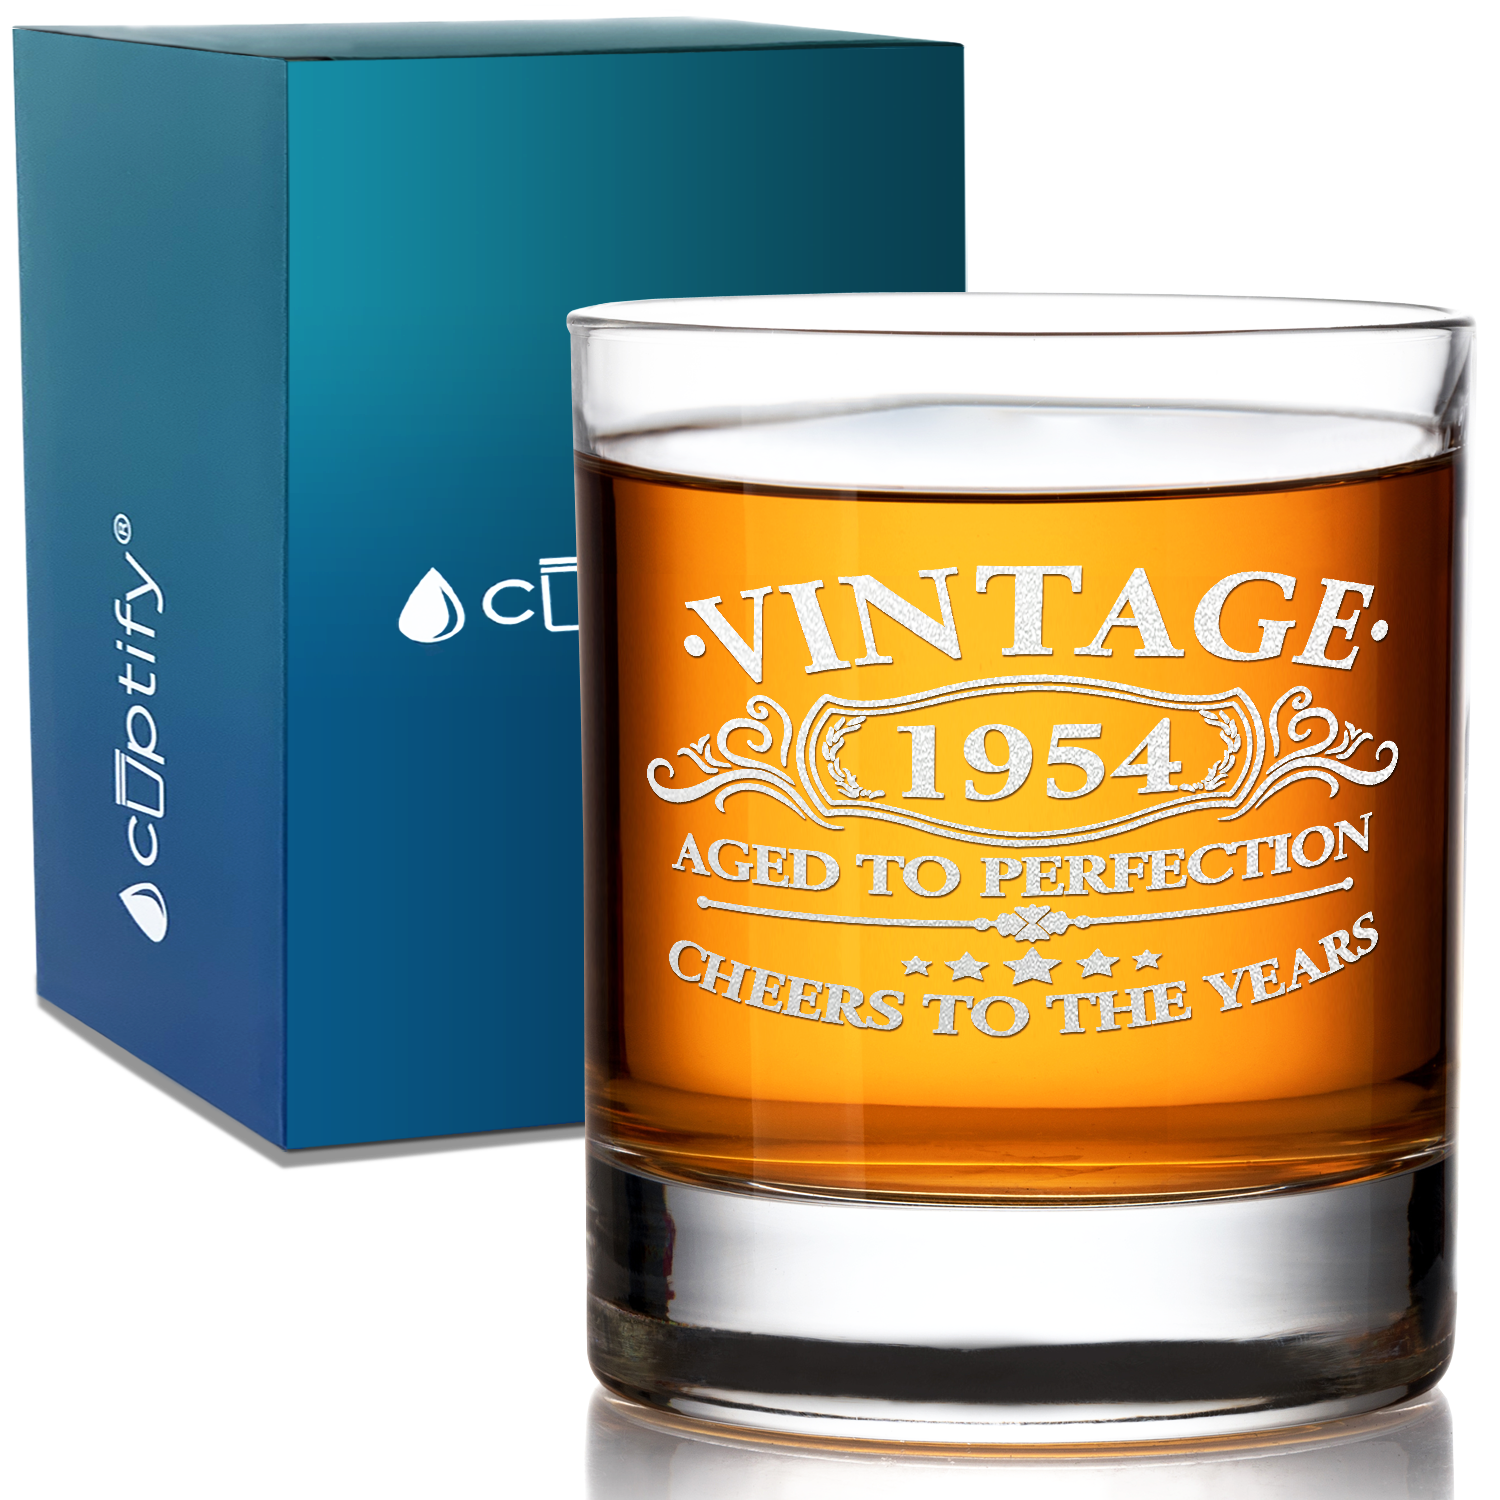 Vintage Aged To Perfection Cheers To 67 Years 1954 Laser Engraved on 10.25oz Old Fashion Glass